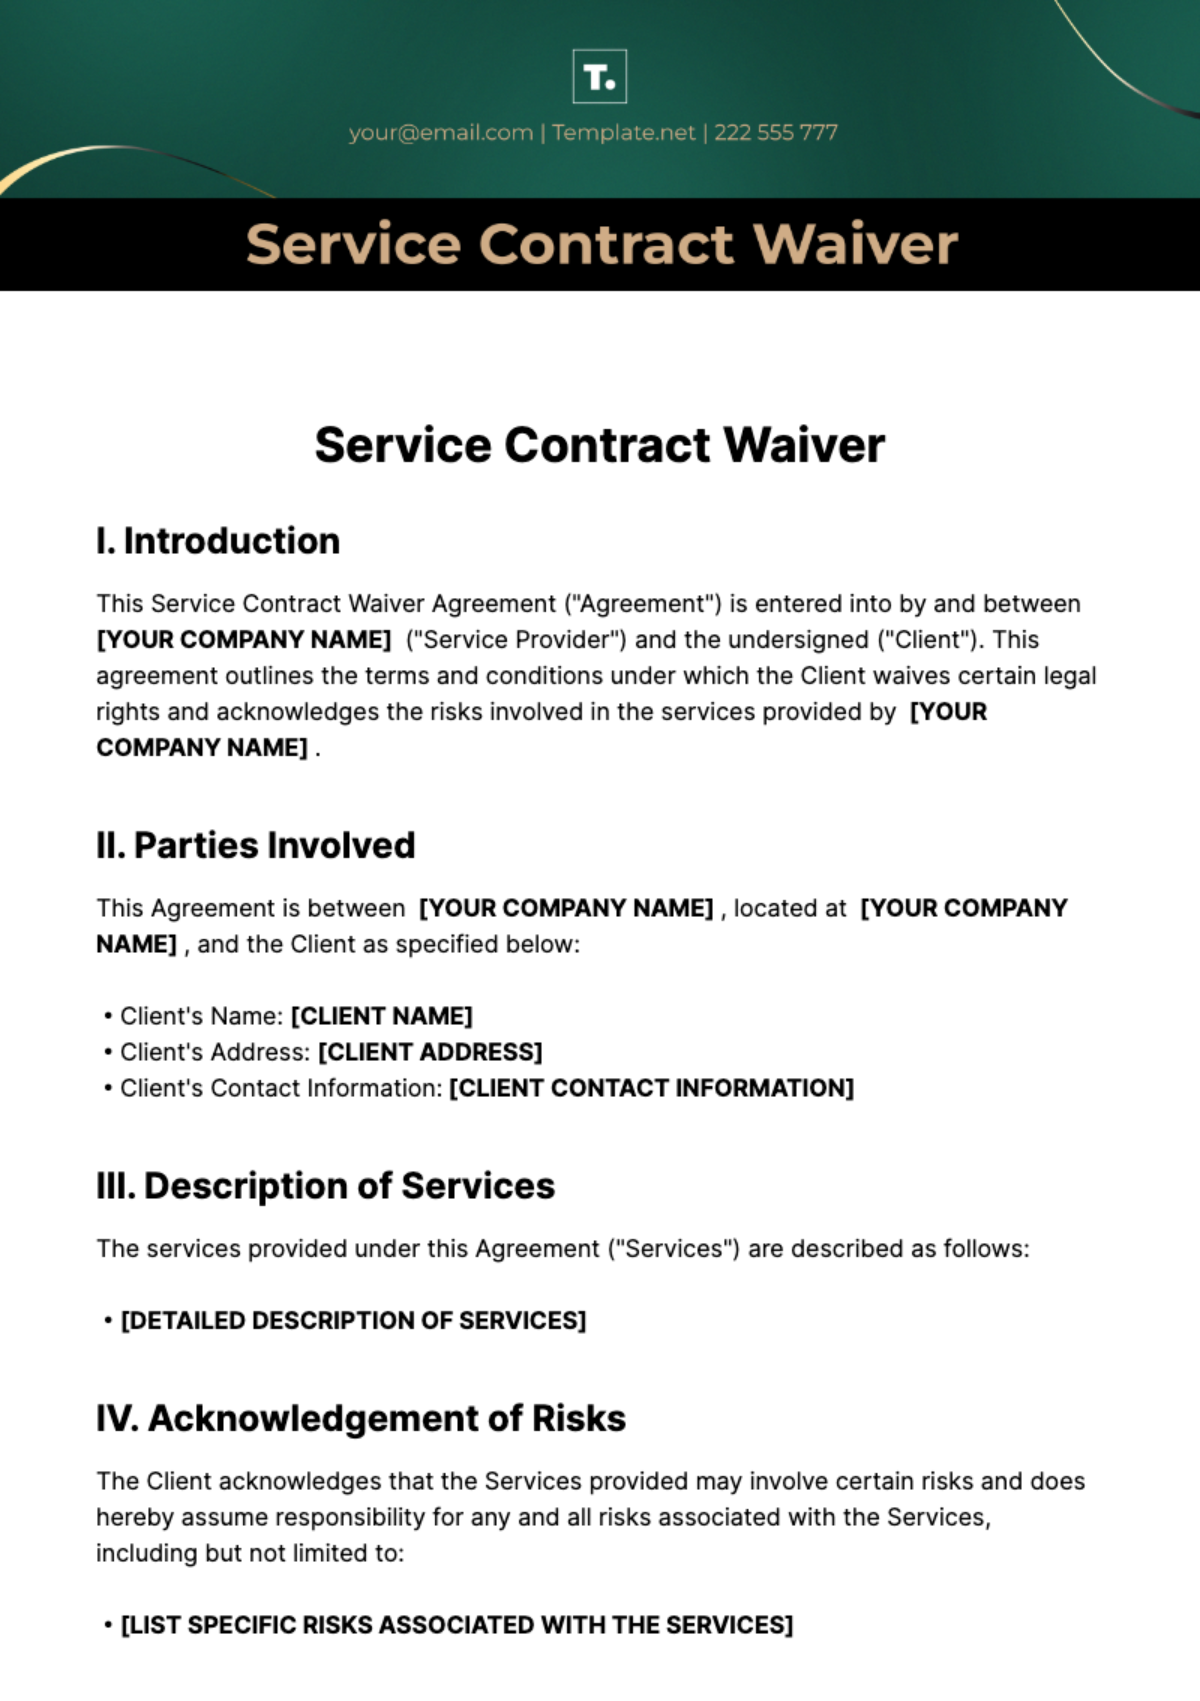 Free Service Contract Waiver Templates